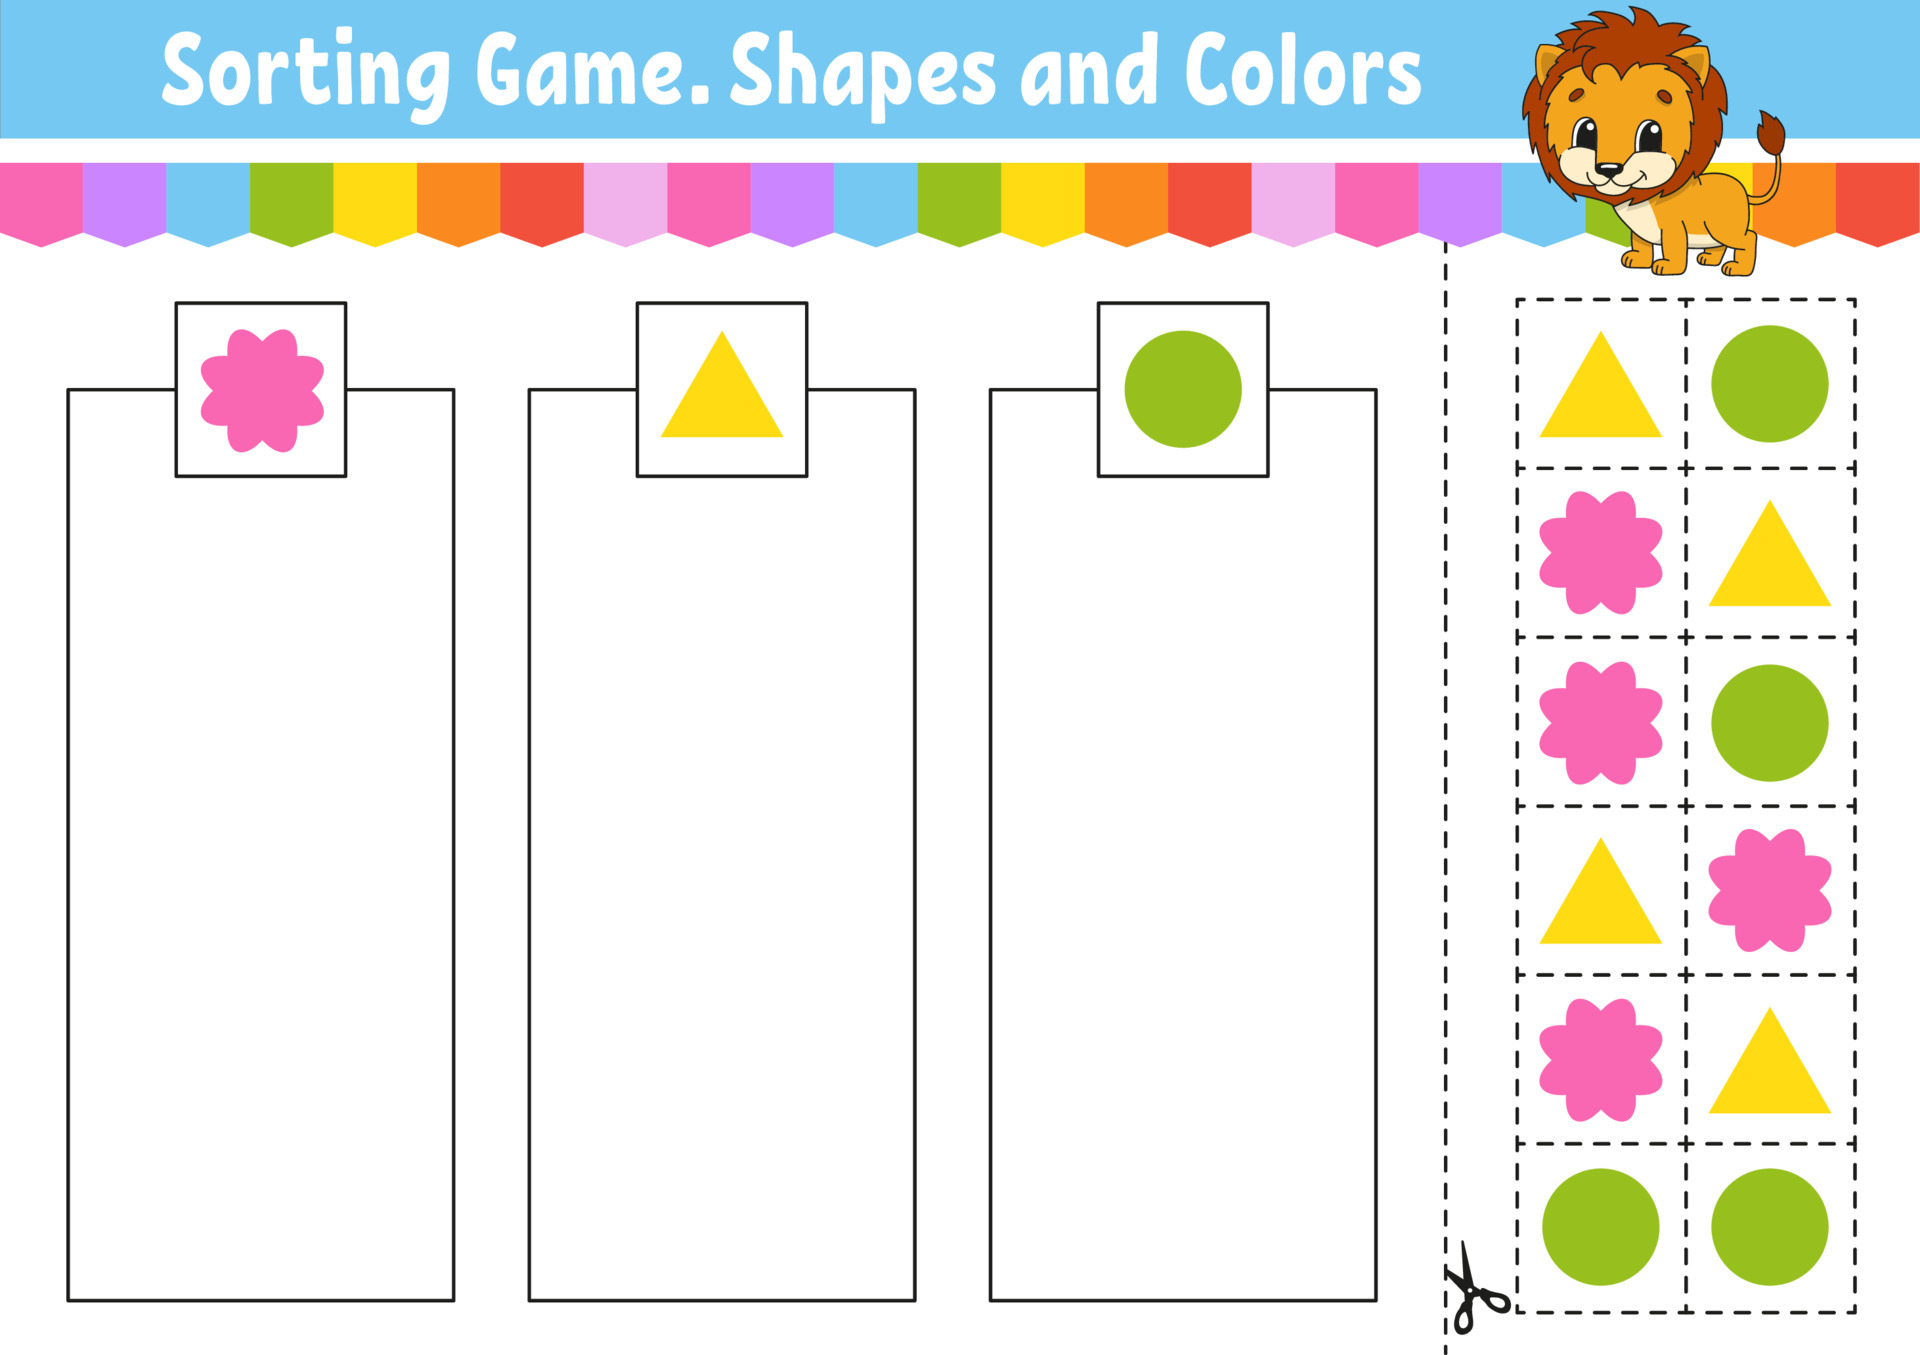 Sorting game. Shapes and colors. Cut and glue. Education